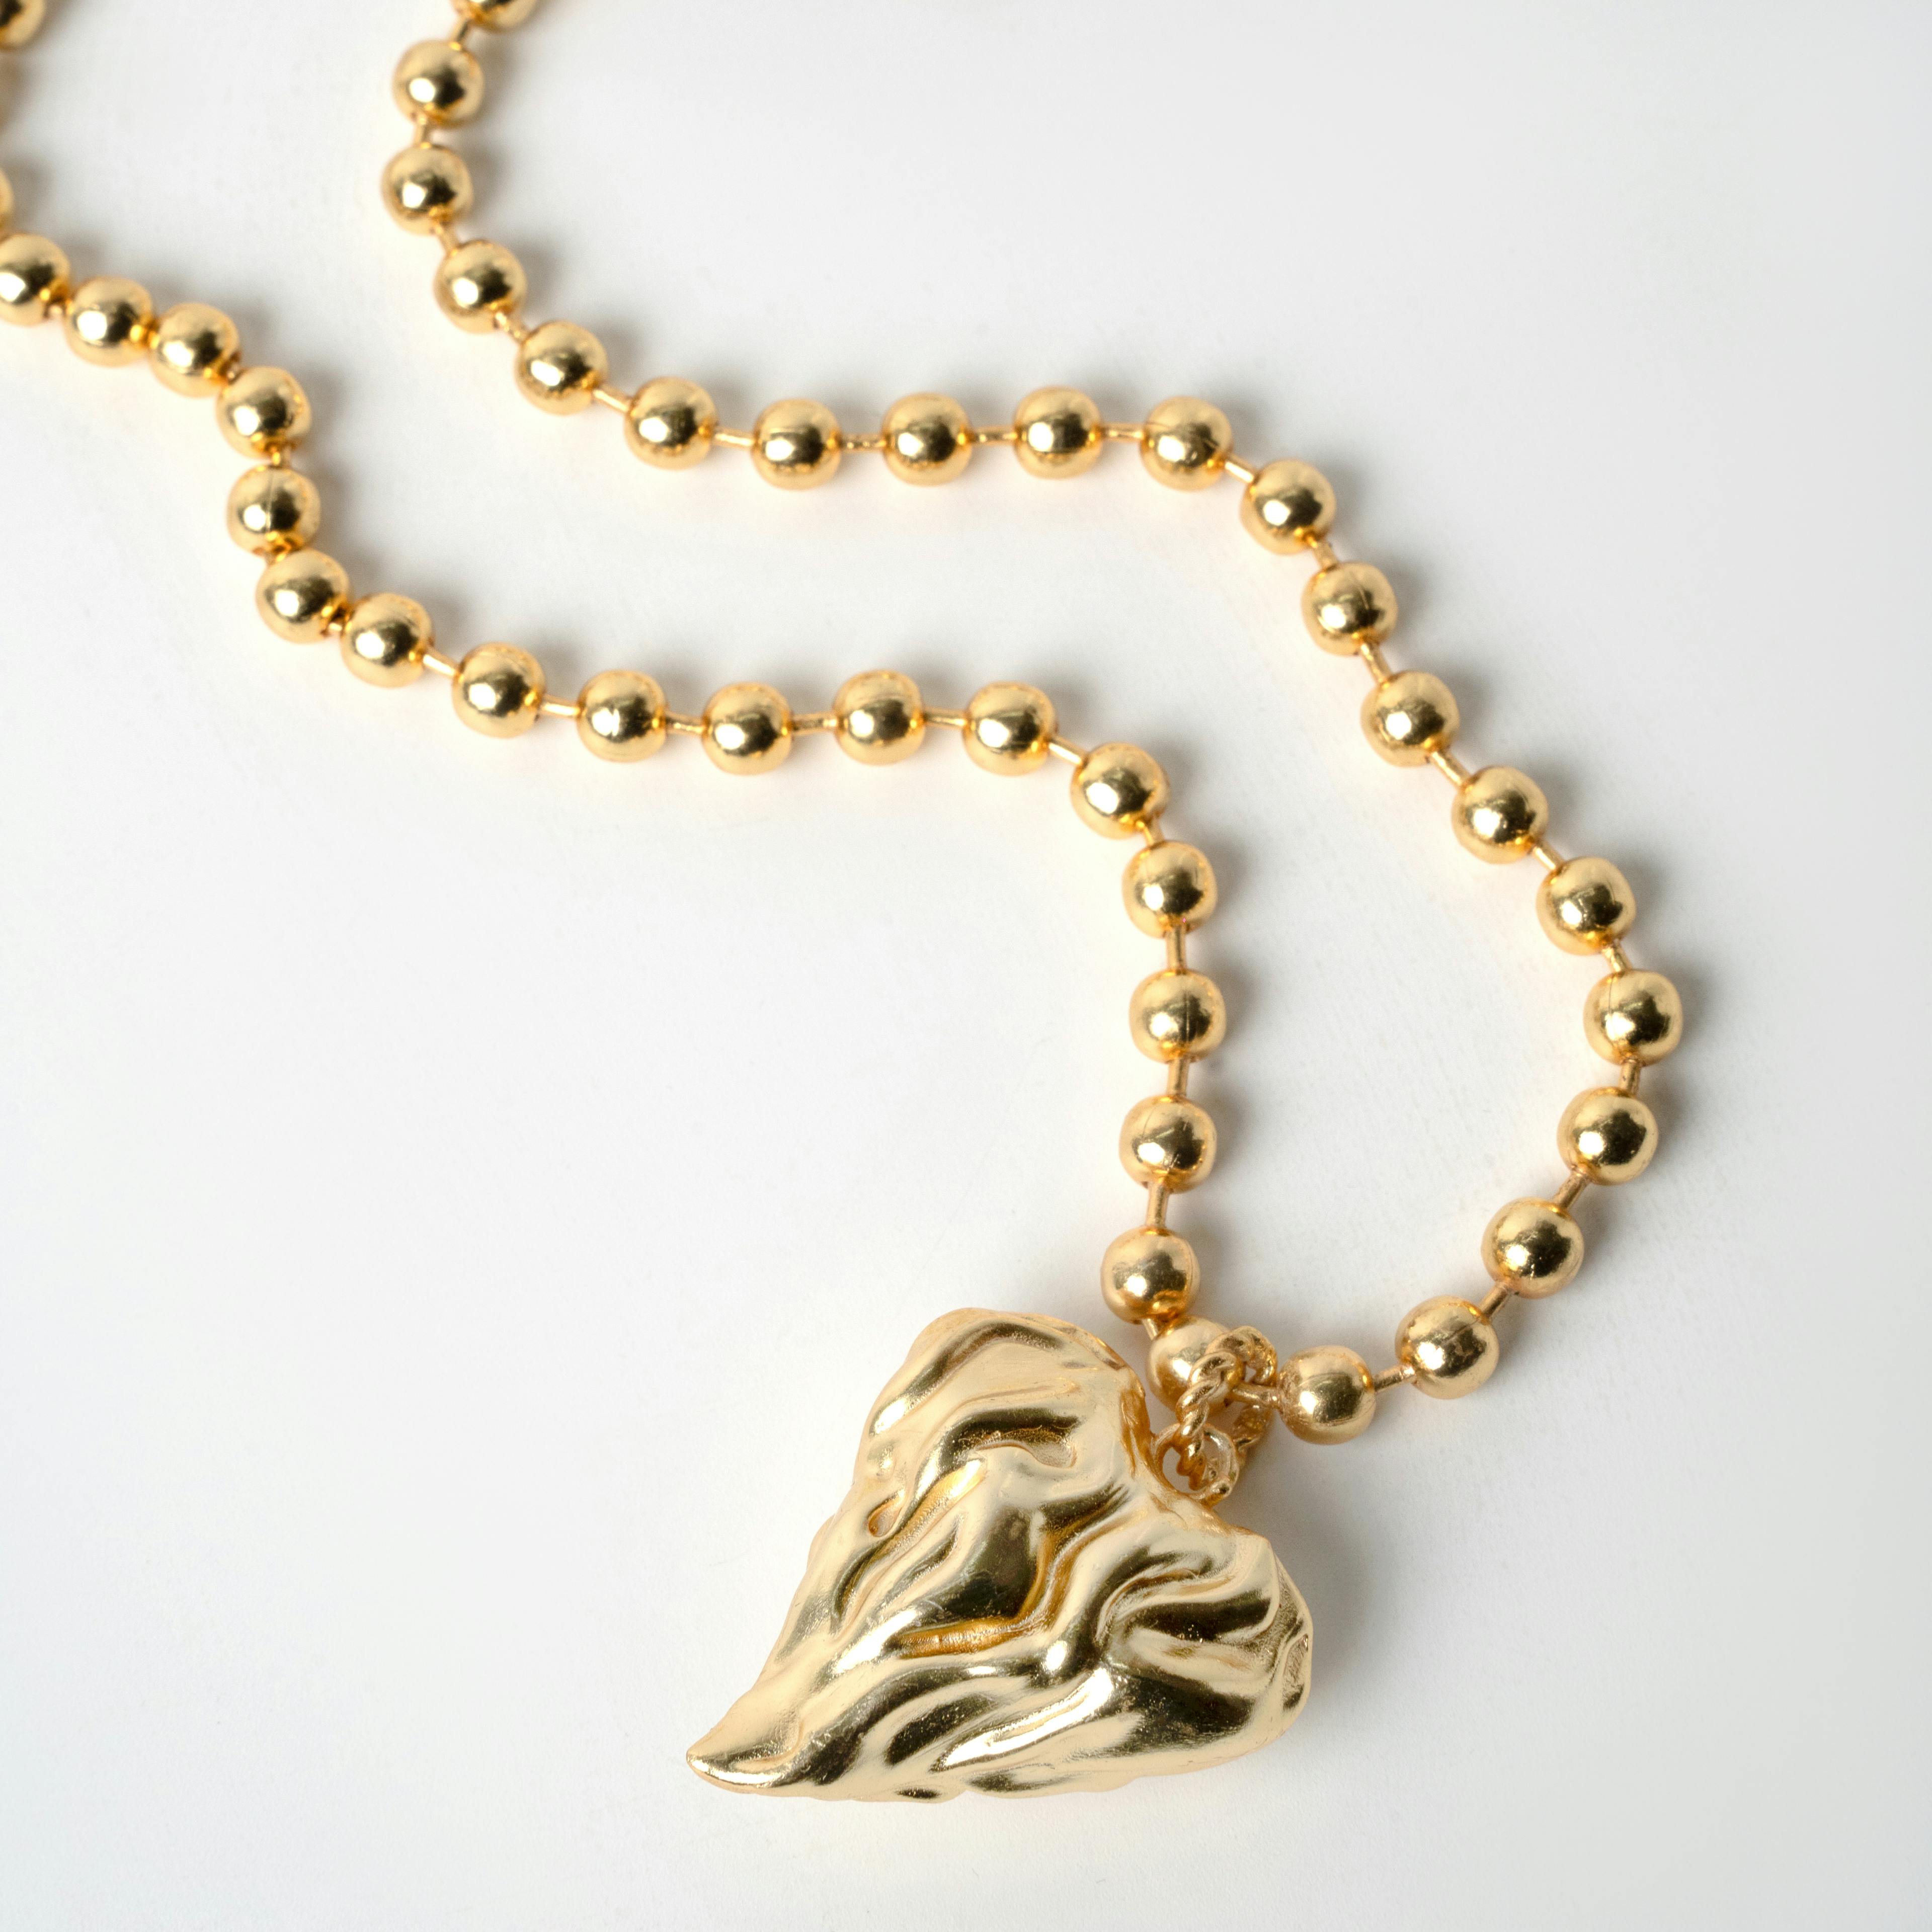 CARDI NECKLACE GOLD TONE, a product by Equiivalence